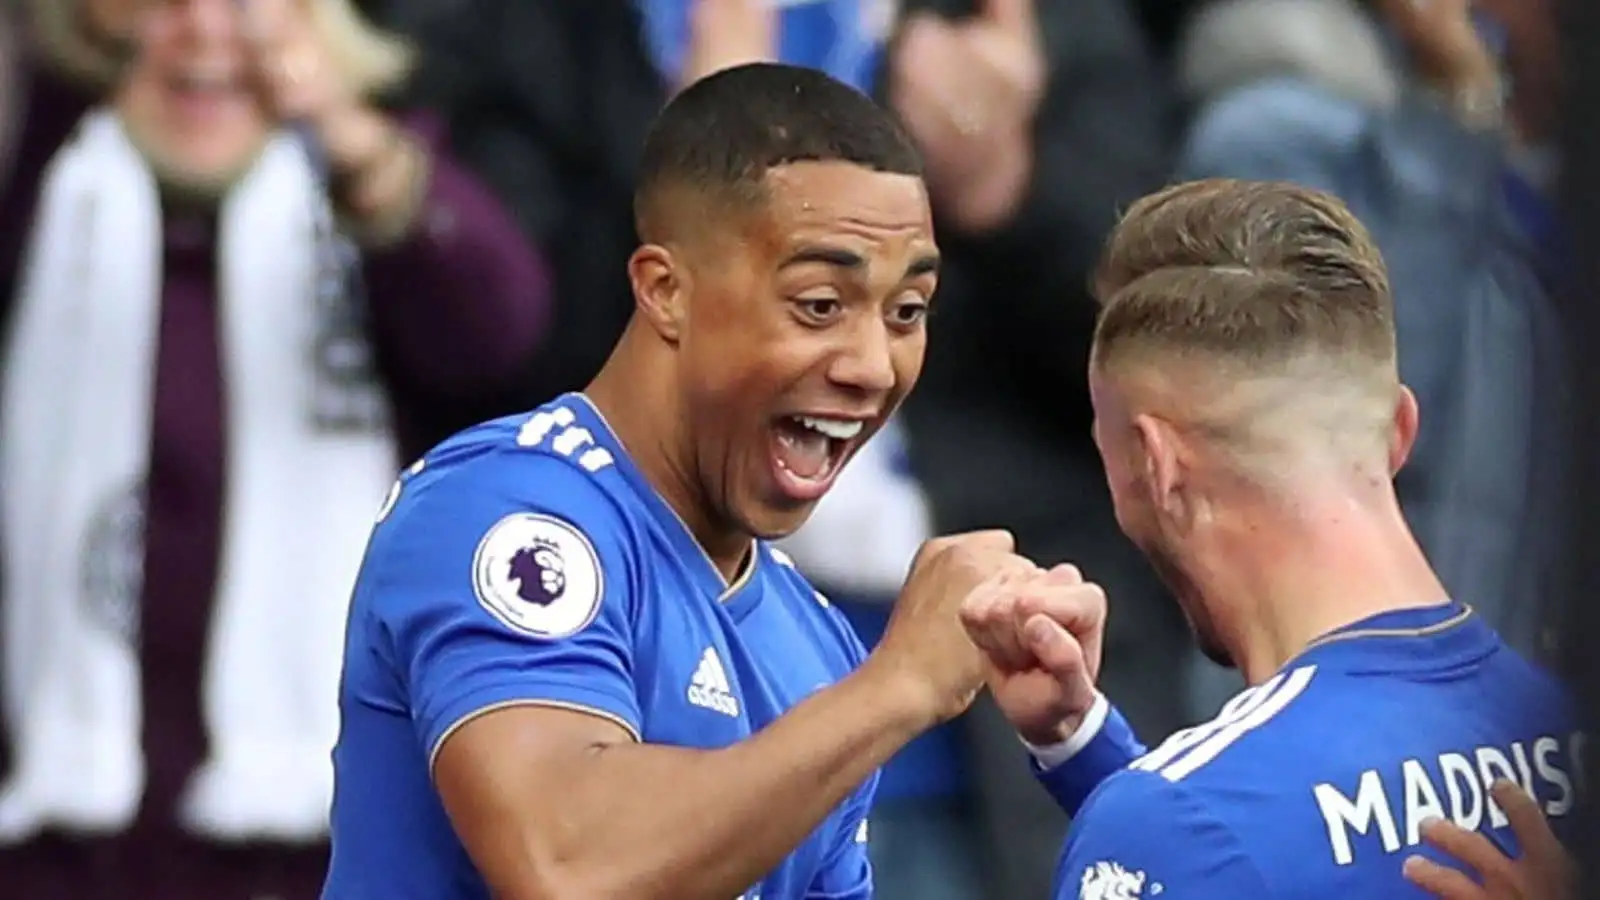 Youri Tielemans, Leicester midfielder, celebrates a goal against Arsenal with James Maddison in Premier League game